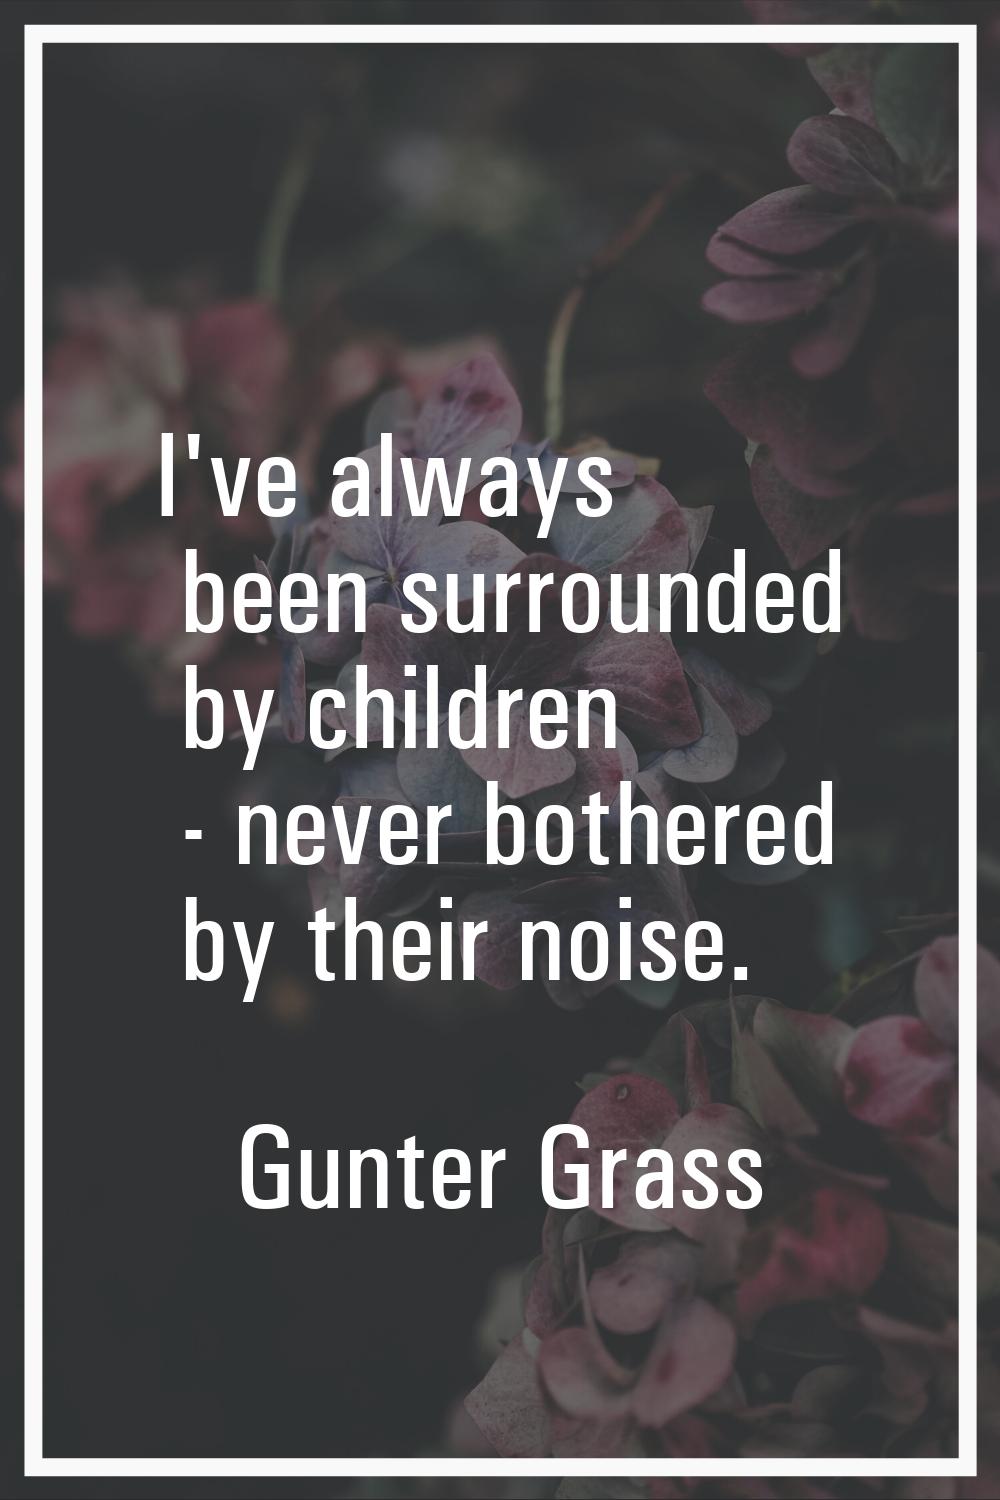 I've always been surrounded by children - never bothered by their noise.